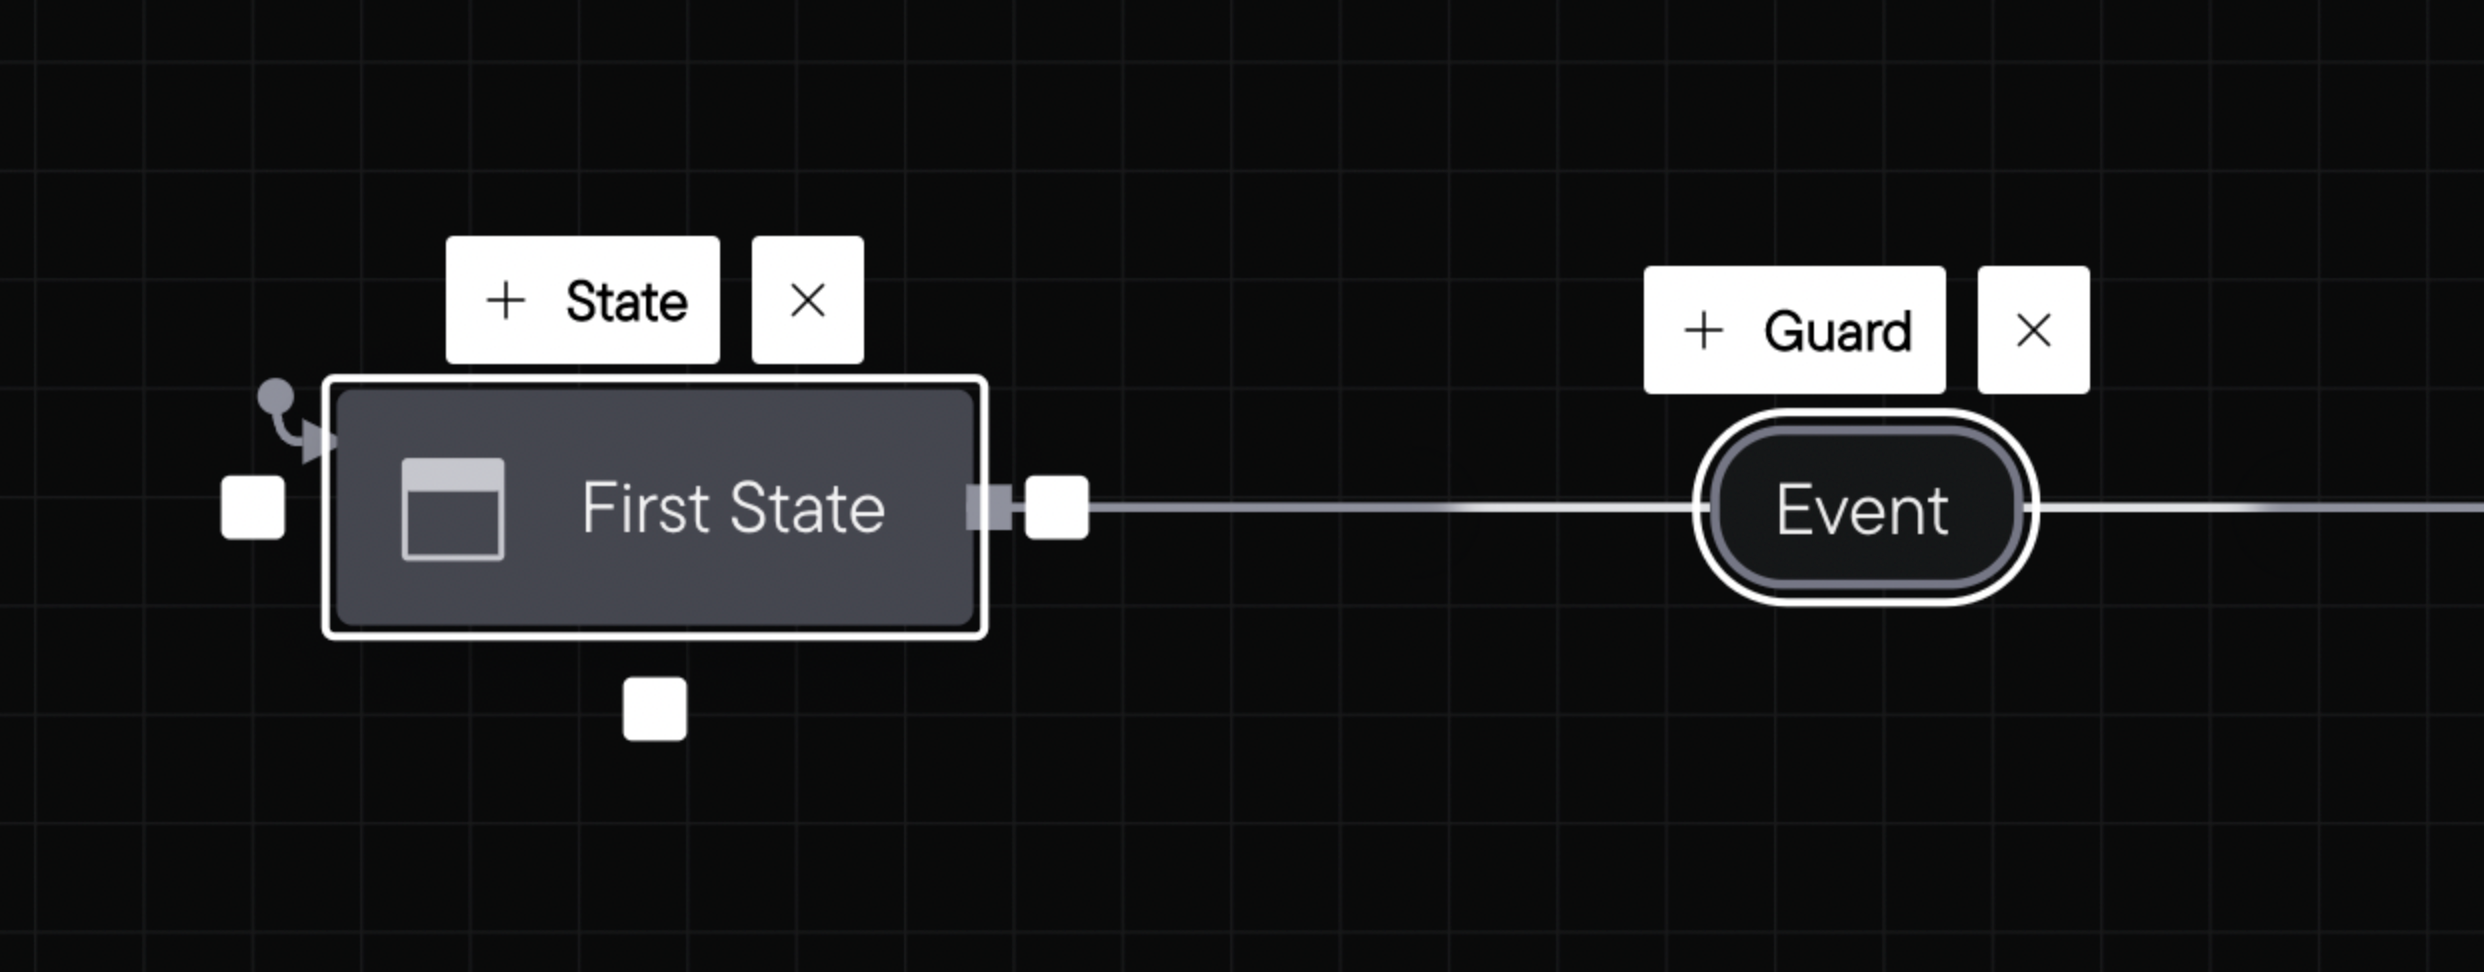 A state with quick action buttons labeled “+ state” and “x” to delete the state. And an event with quick action buttons labeled “+ guard“ and “x” to delete the event.